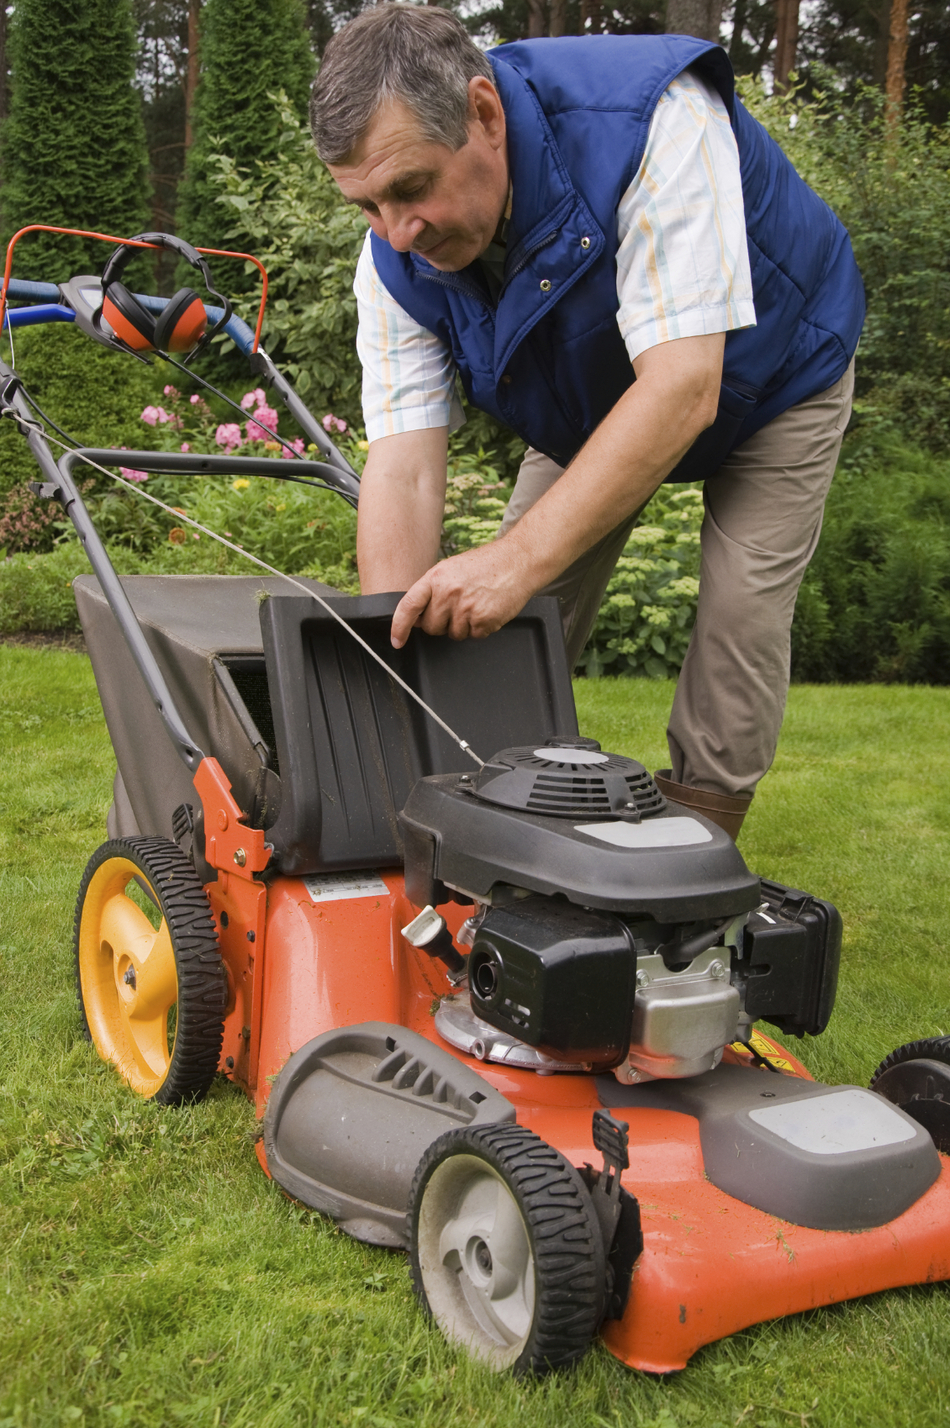 Lawn Mower Accidents That Can Put You In the ER